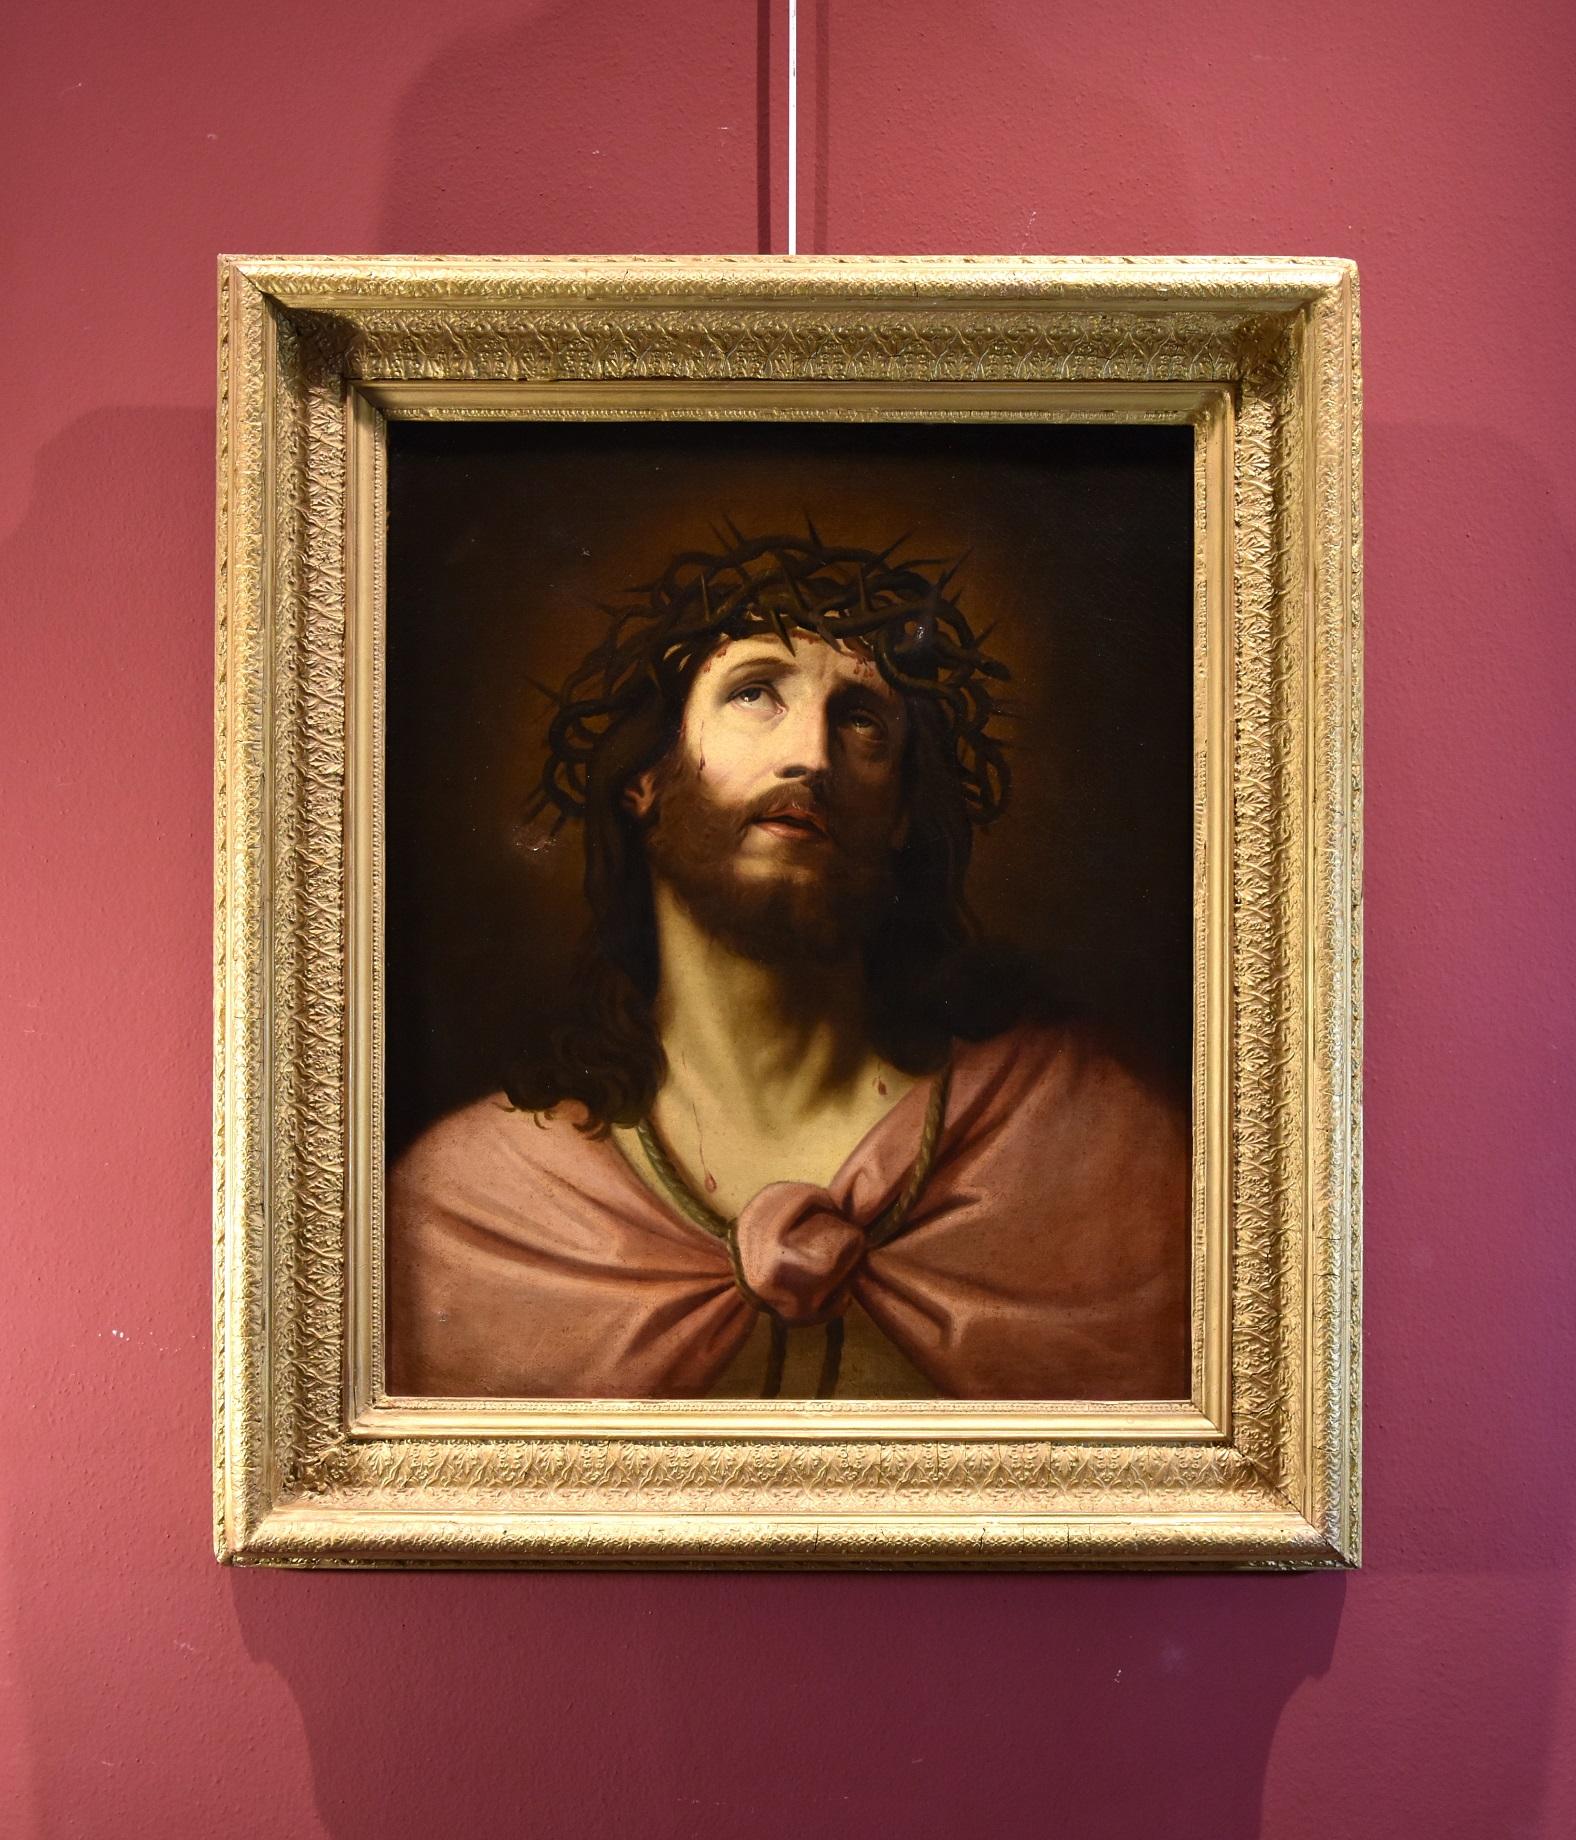 Ecce Homo Christ Trevisani Paint Oil on canvas Old master 18yh Century Italy - Old Masters Painting by Francesco Trevisani (Capodistria 1656 - Rome 1746) 